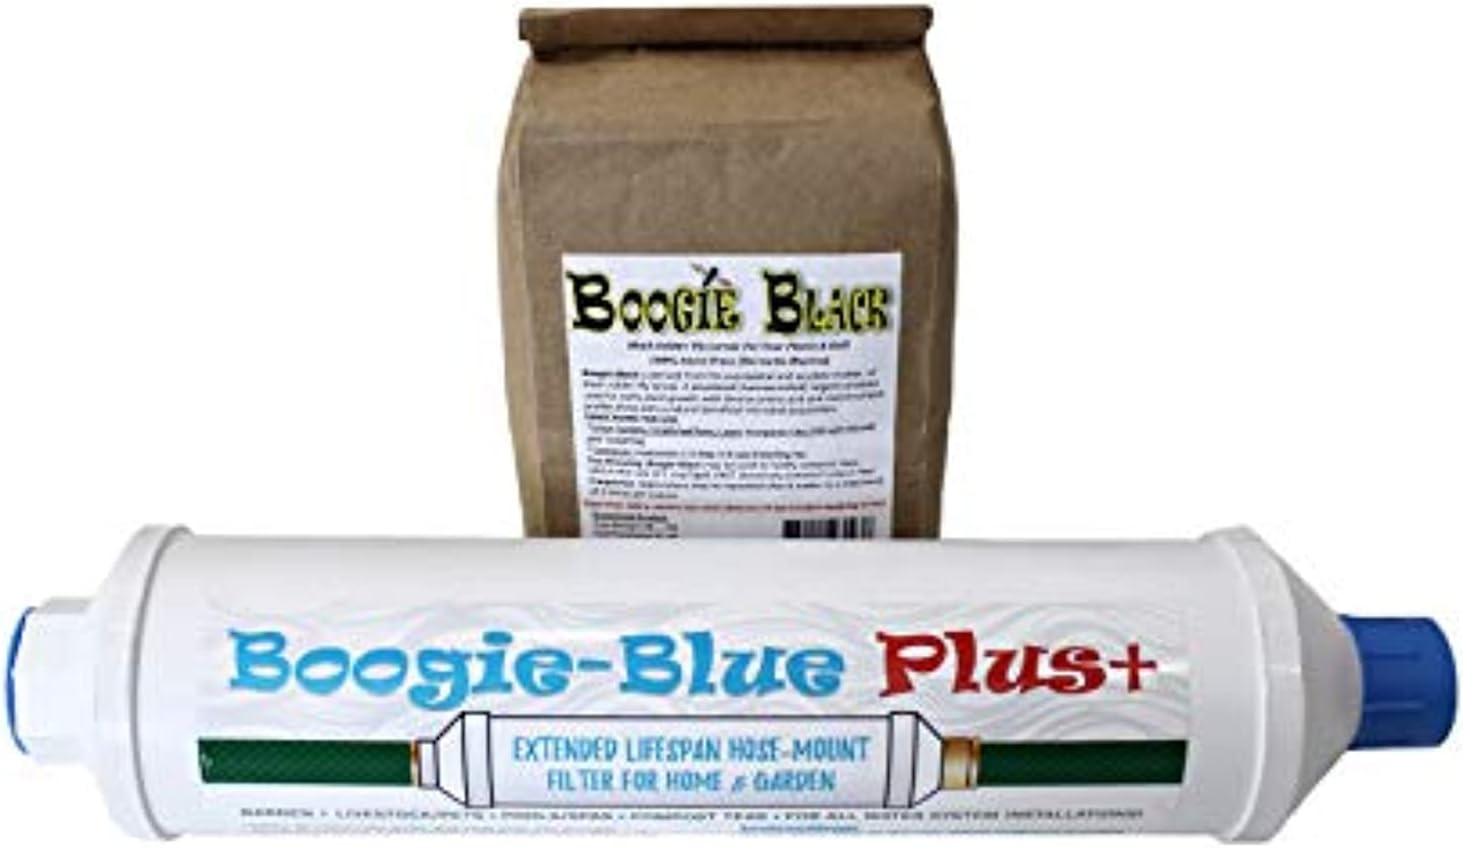 Boogie Blue Plus High Capacity Water Filter for Garden Hose, RV and Outdoor use -Removes Chlorine, Chloramines, VOCs, Pesticides/Herbicides Bundle with Boogie Black Fly Soldier Larvae 1lb